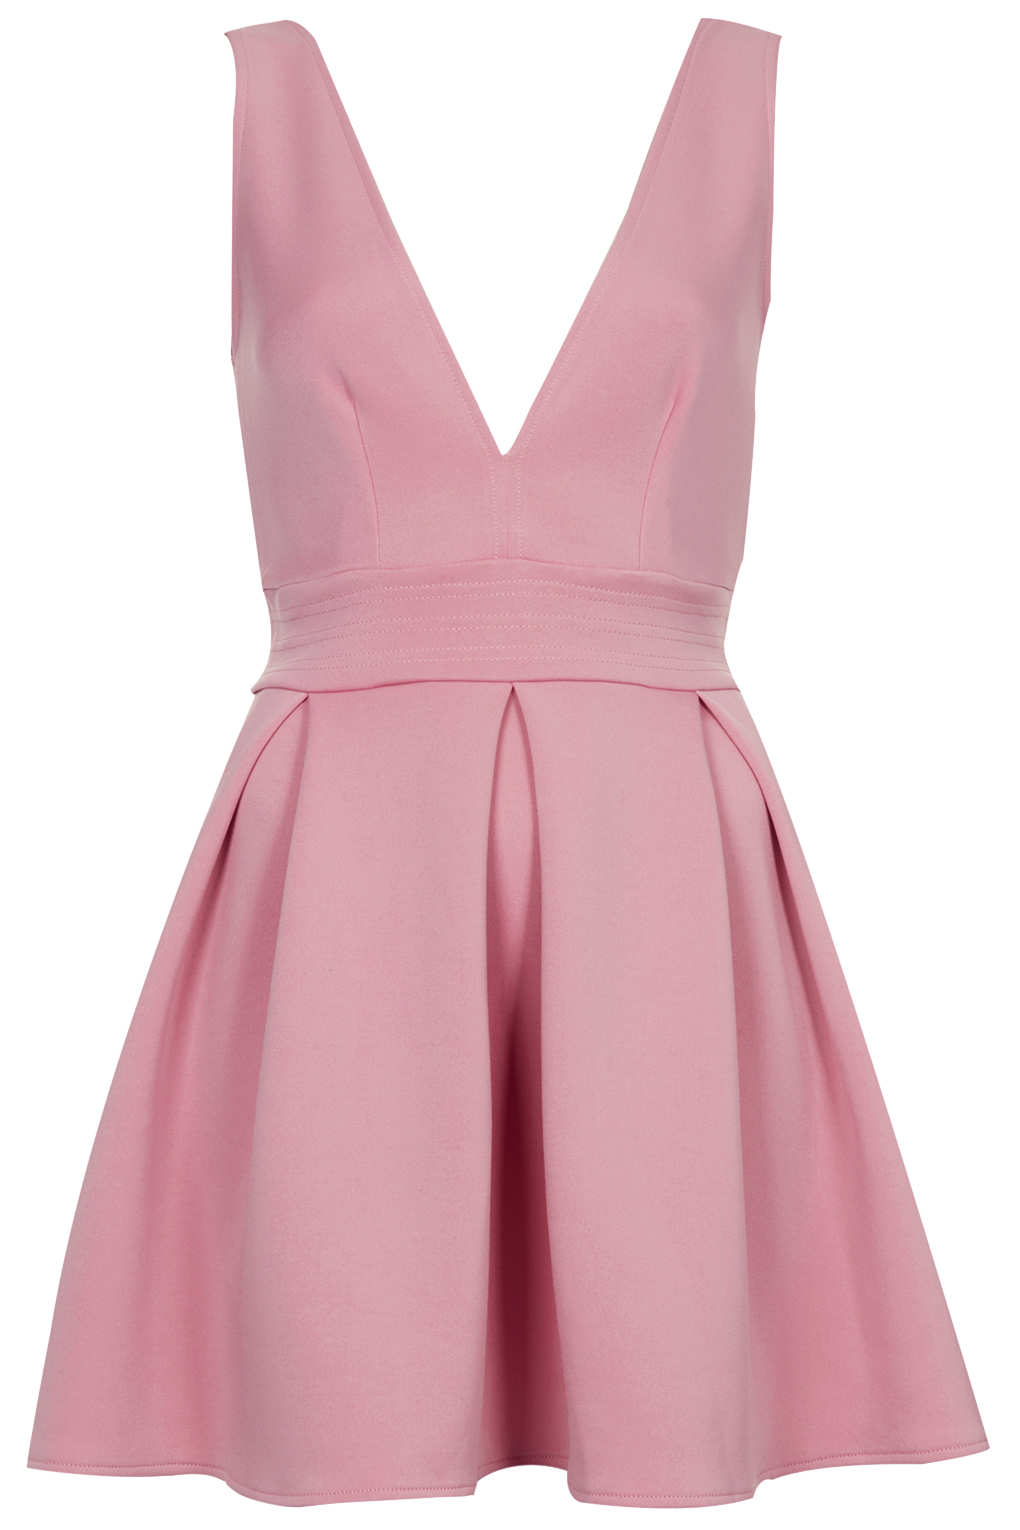 Topshop Deep V Scuba Skater Dress By Oh My Love in Pink (ROSE) | Lyst